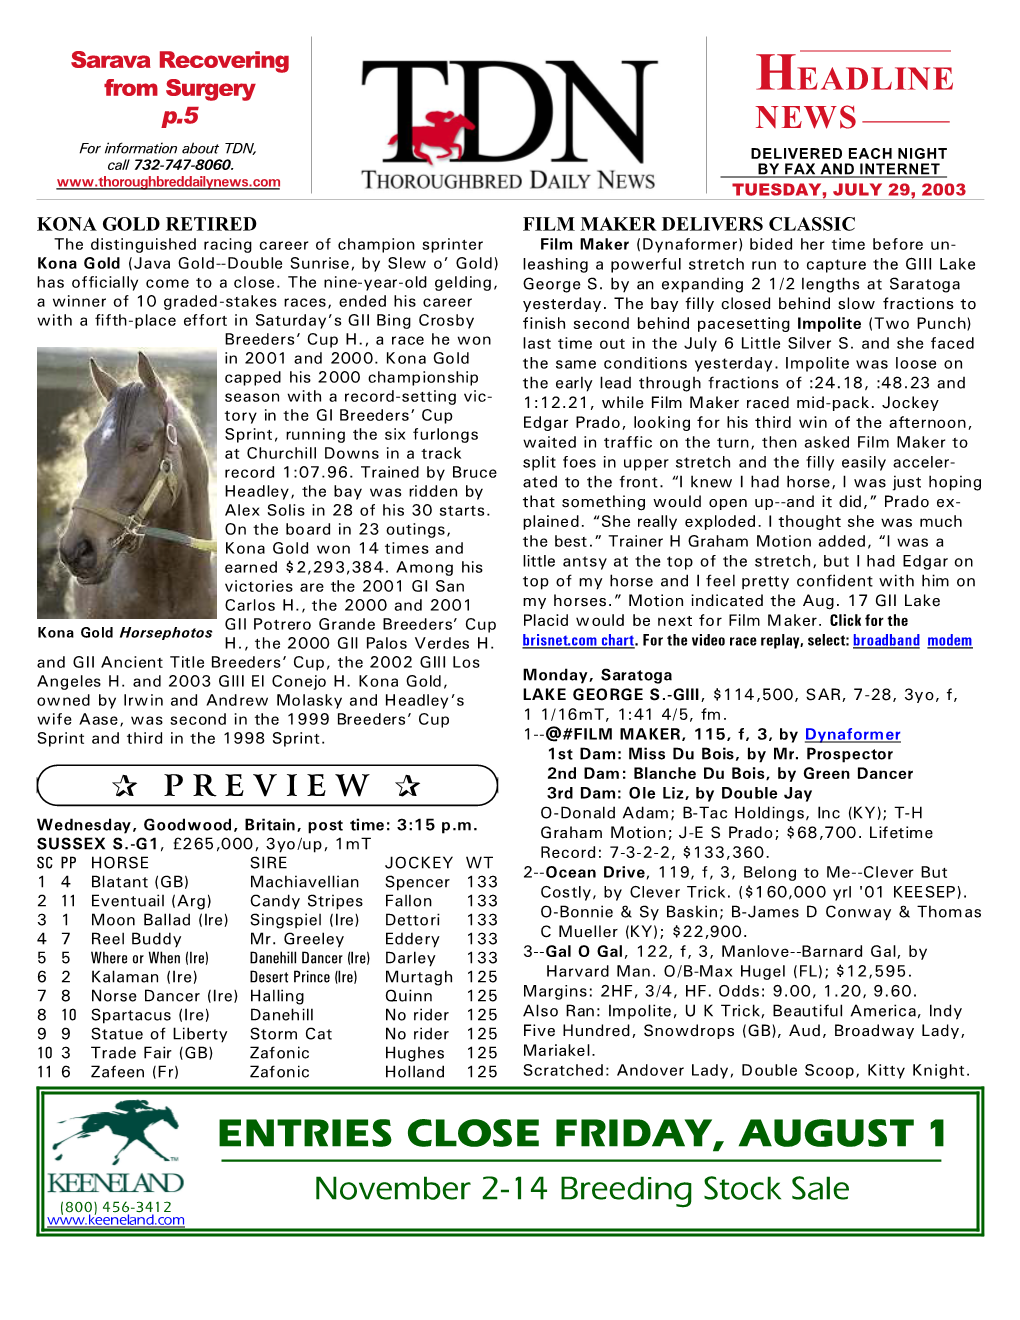 ENTRIES CLOSE FRIDAY, AUGUST 1 November 2-14 Breeding Stock Sale (800) 456-3412 TDN P HEADLINE NEWS • 7/29/03 • PAGE 2 of 5